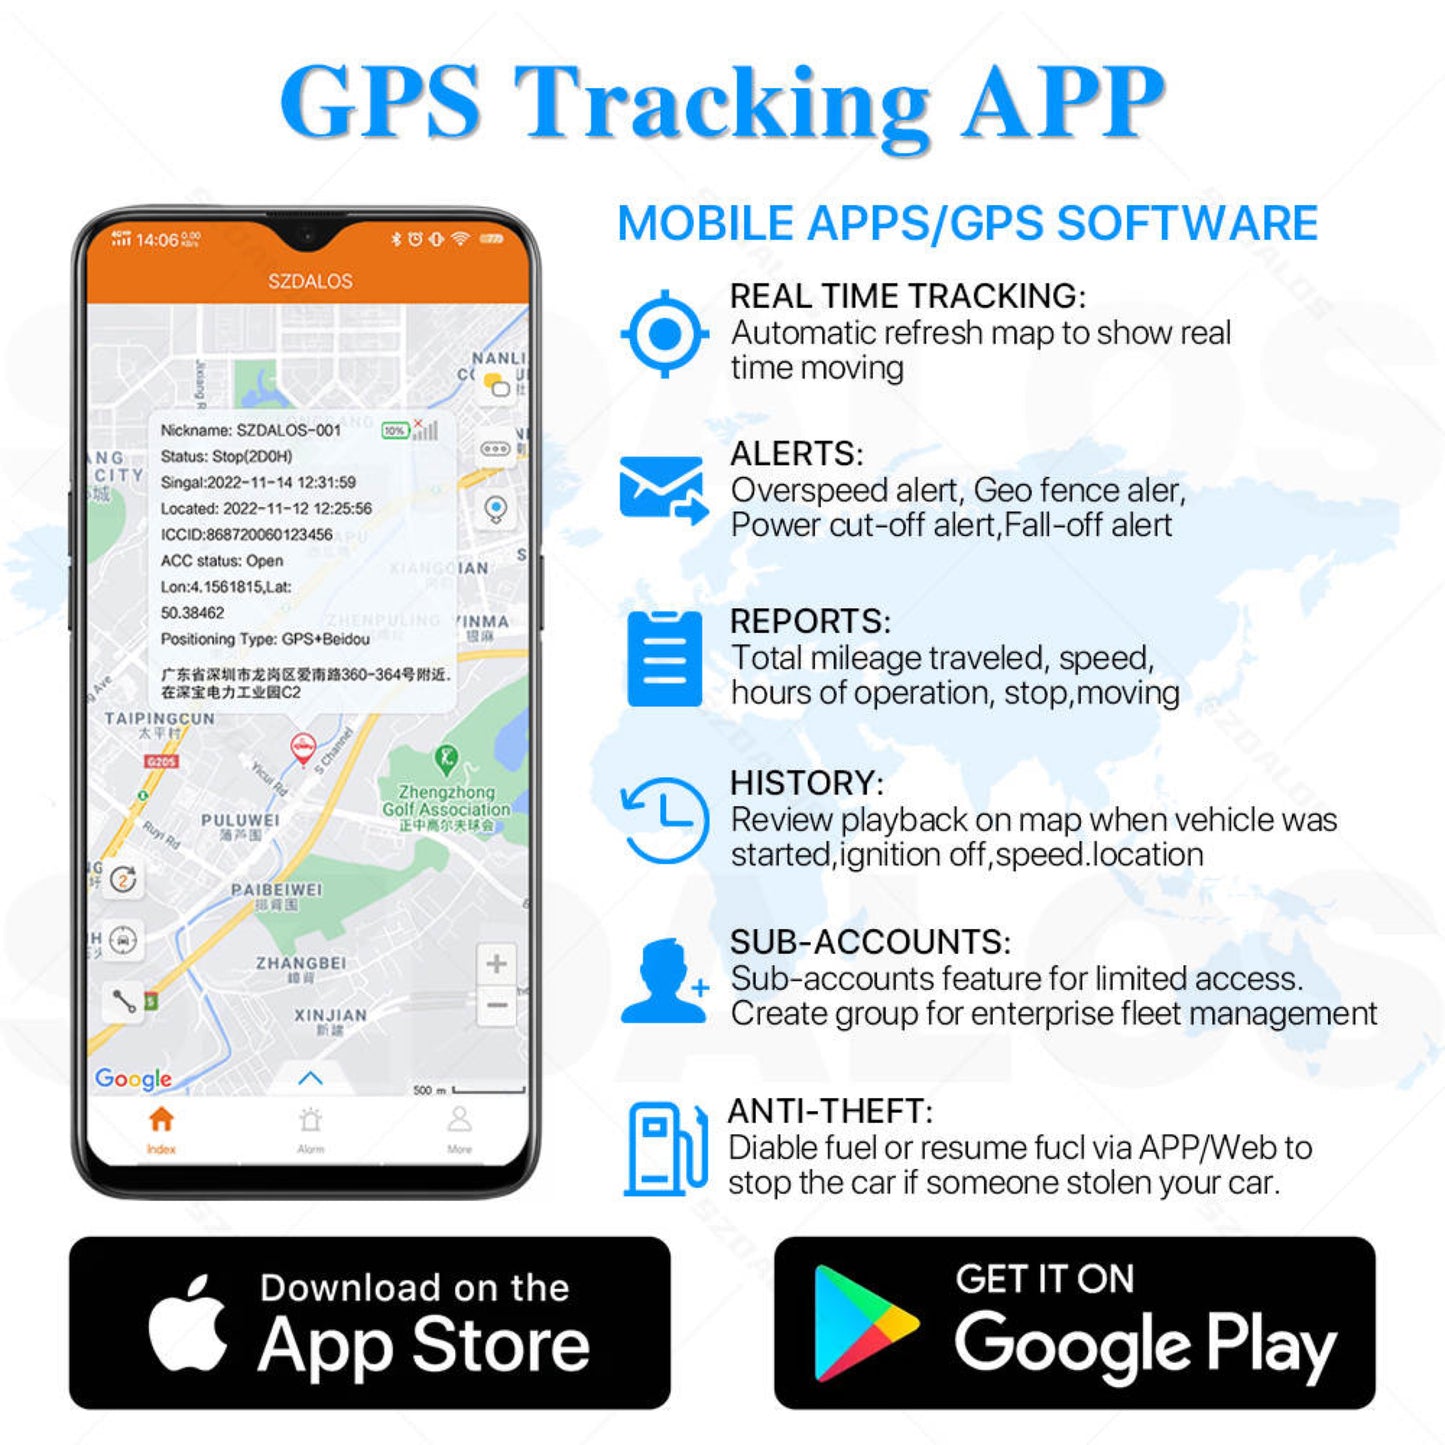 Copia Mea SecureTrack: 4G LTE GPS Auto, Motorcycle, and Boat Tracker